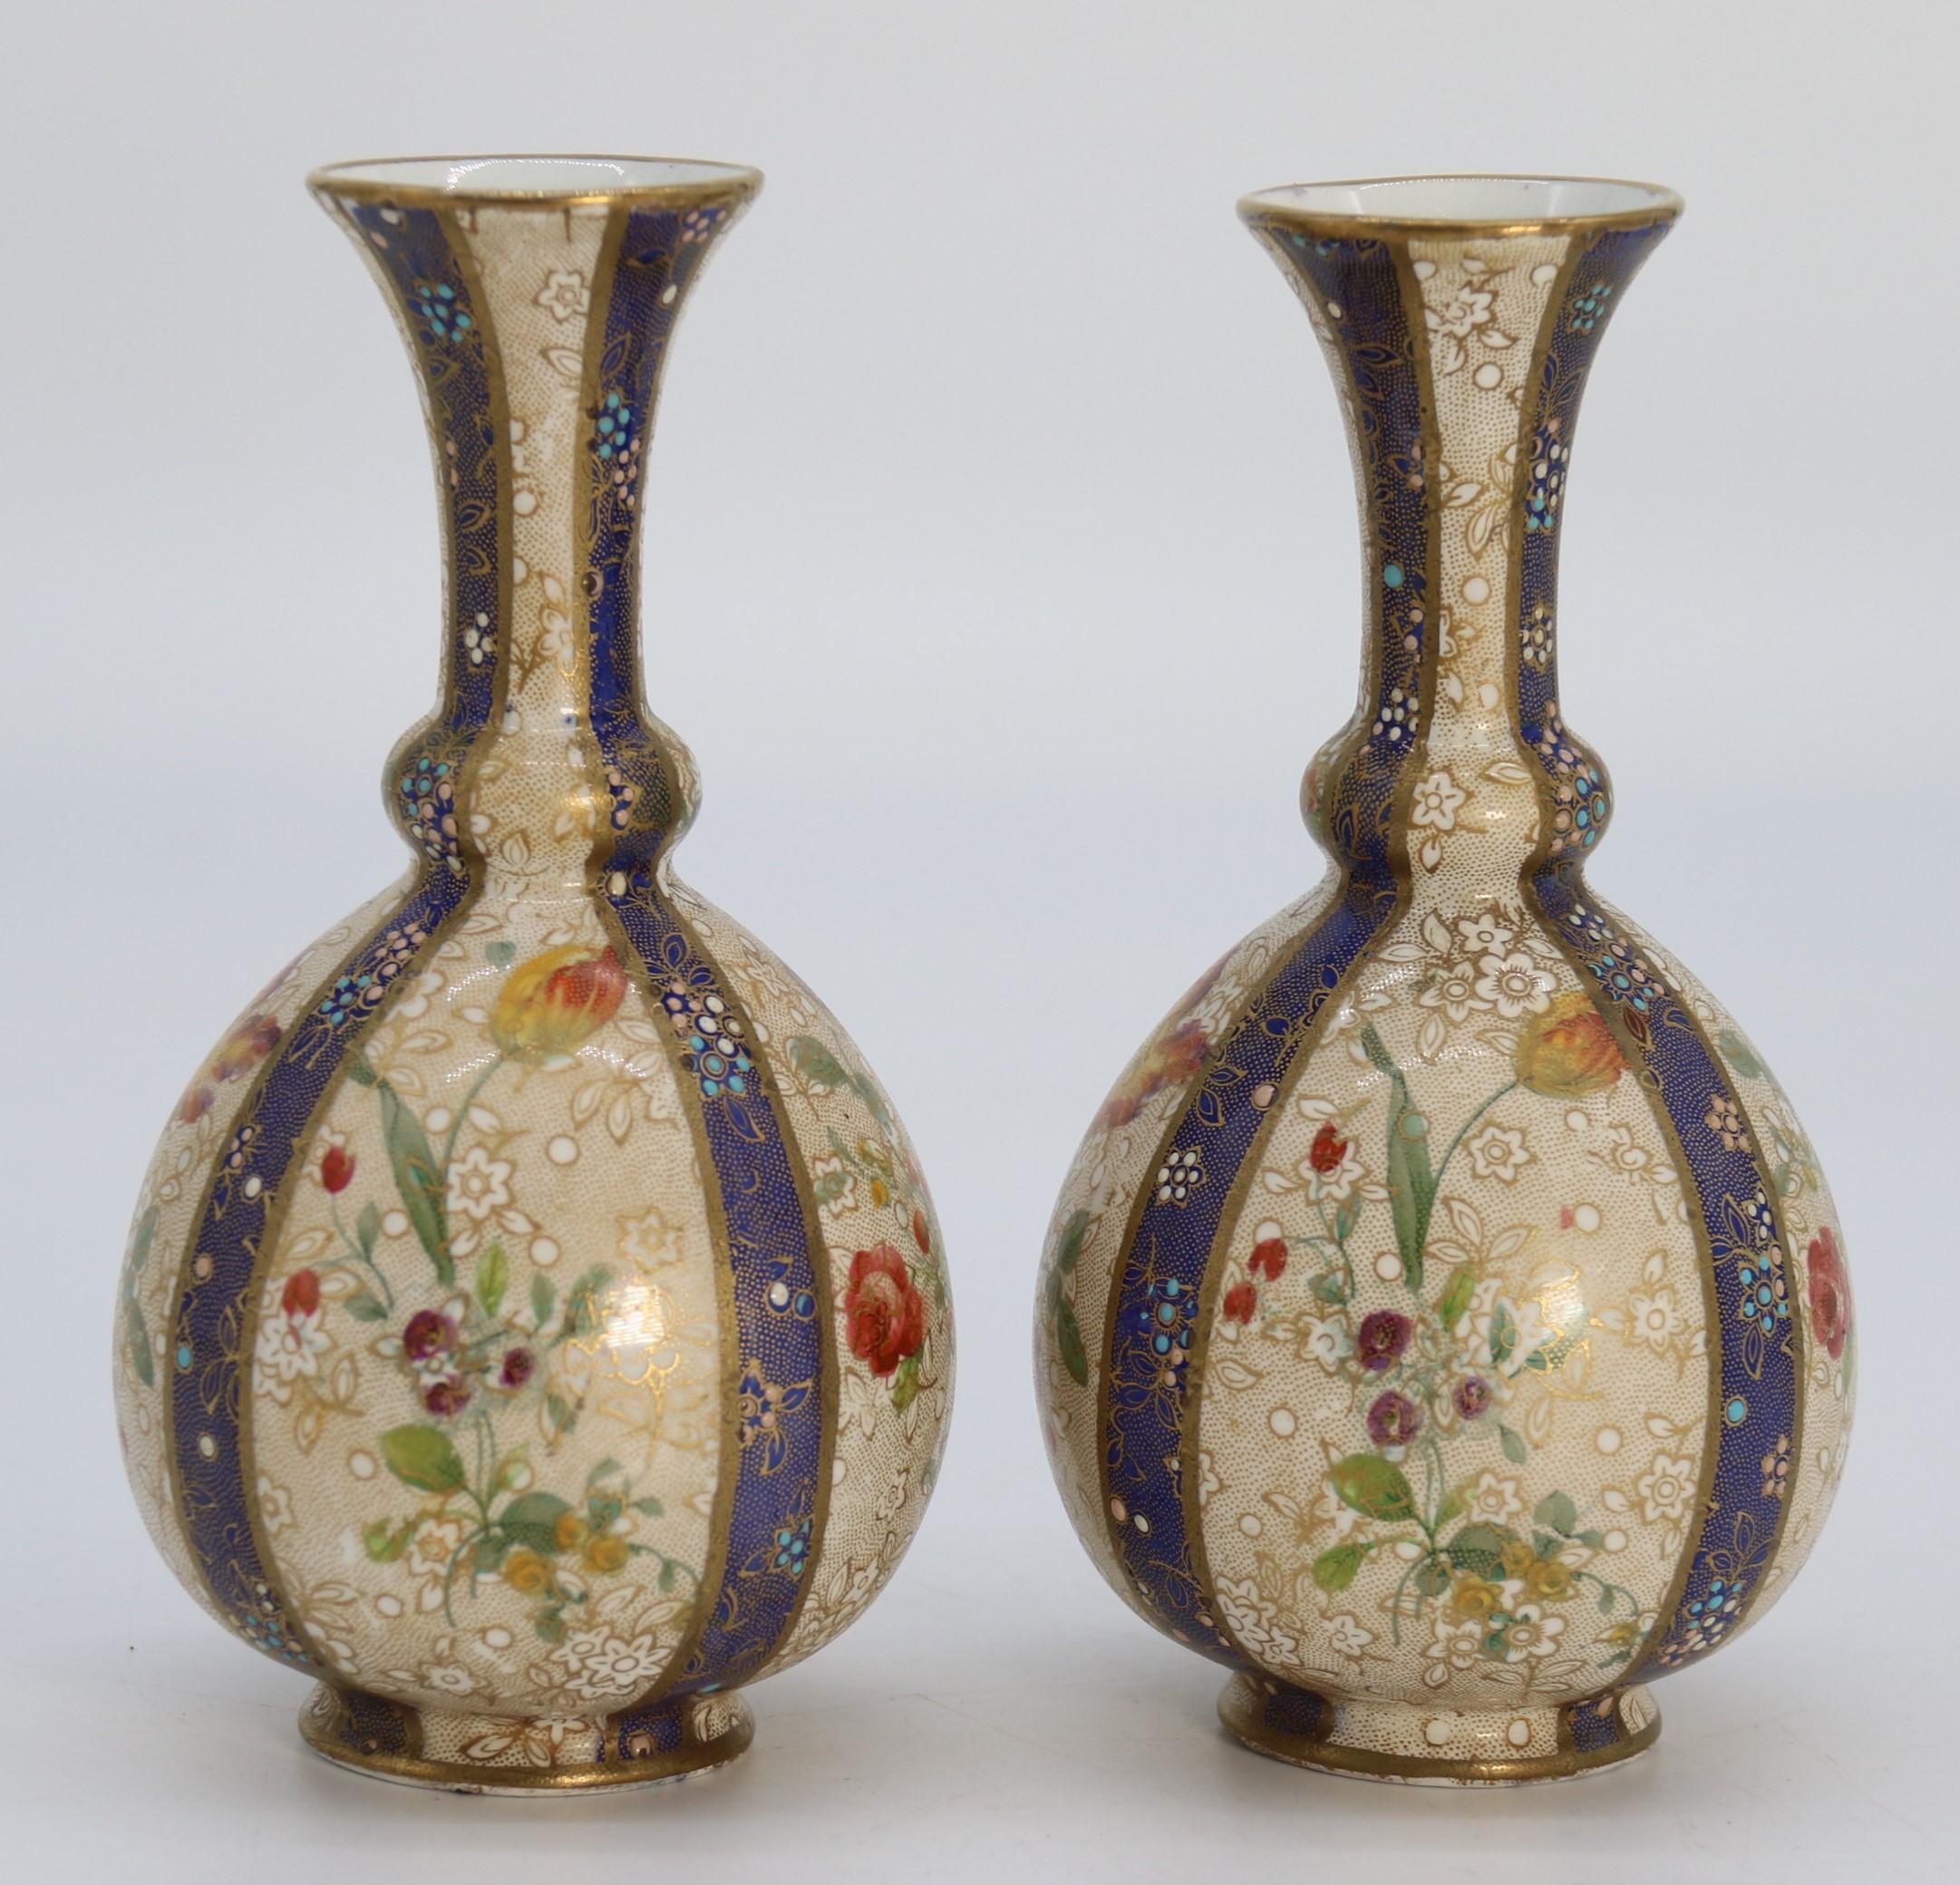 This most unusual pair of delicately decorated early Carlton Ware vases was made at the English Stoke on Trent factory.  These pleasing vases are of a rare pattern and one that I have never seen before. They have a bulbous form with a shaped tall